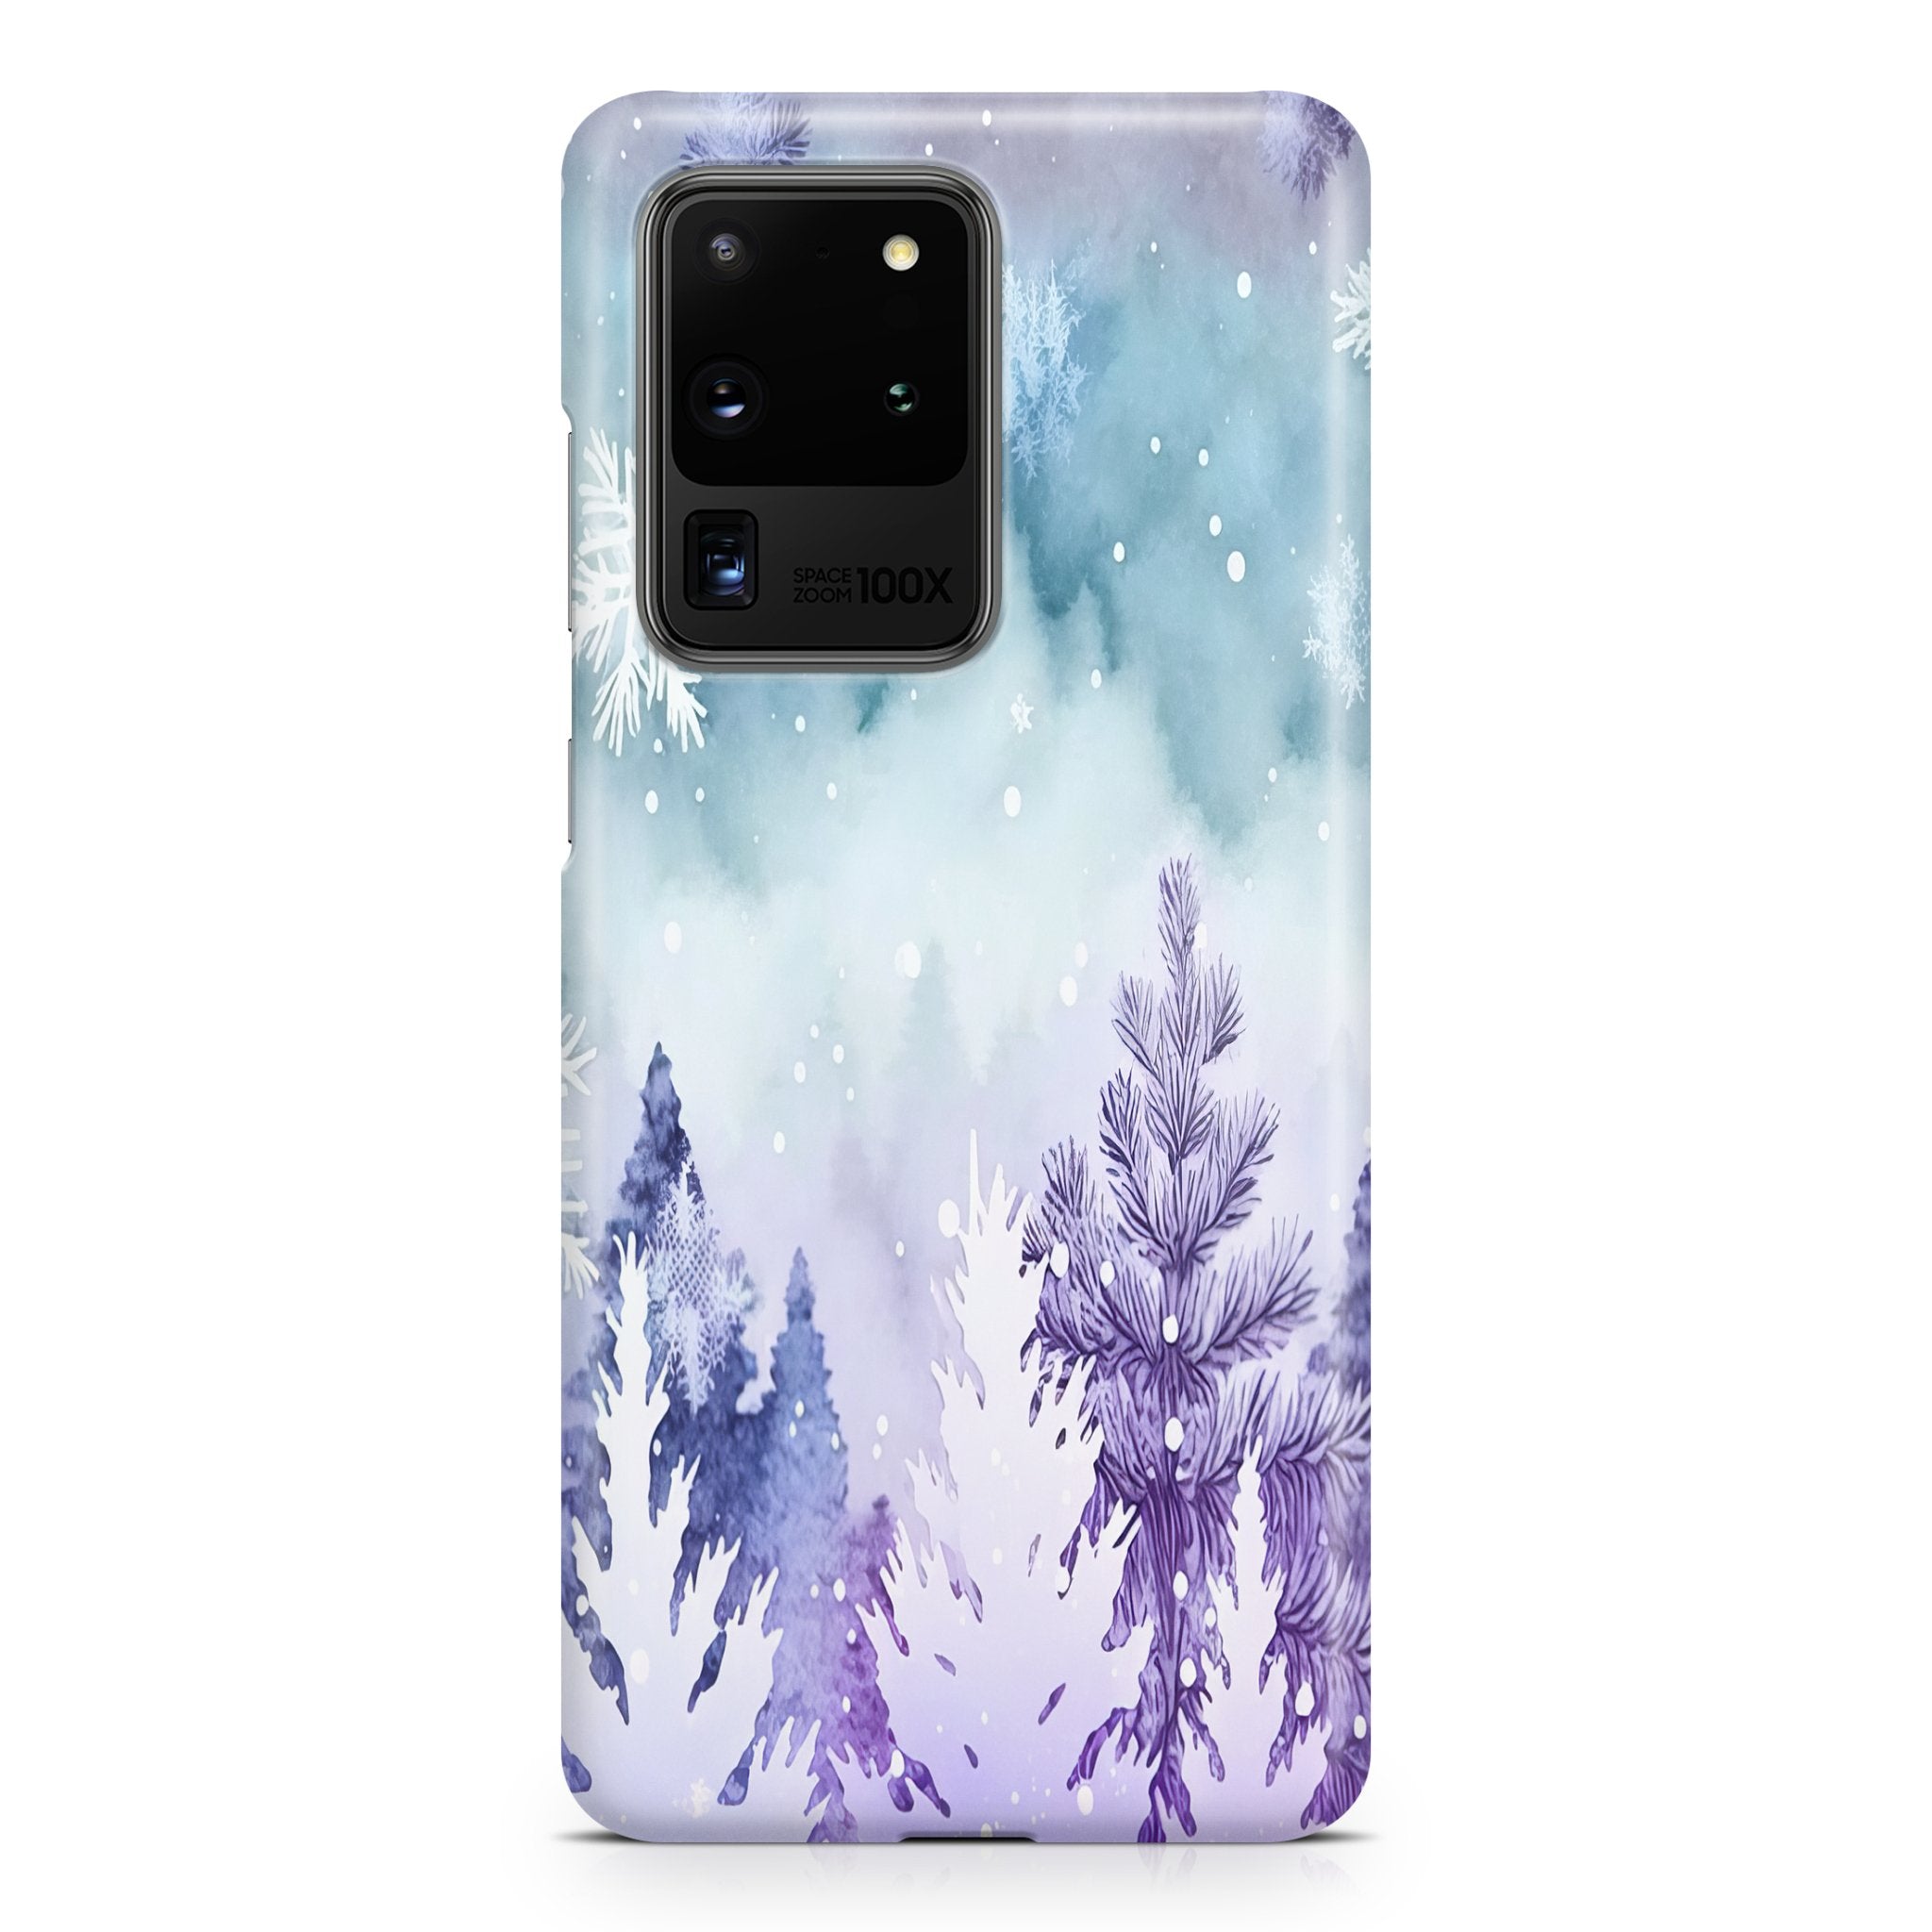 Quiet Snowfall - Samsung phone case designs by CaseSwagger